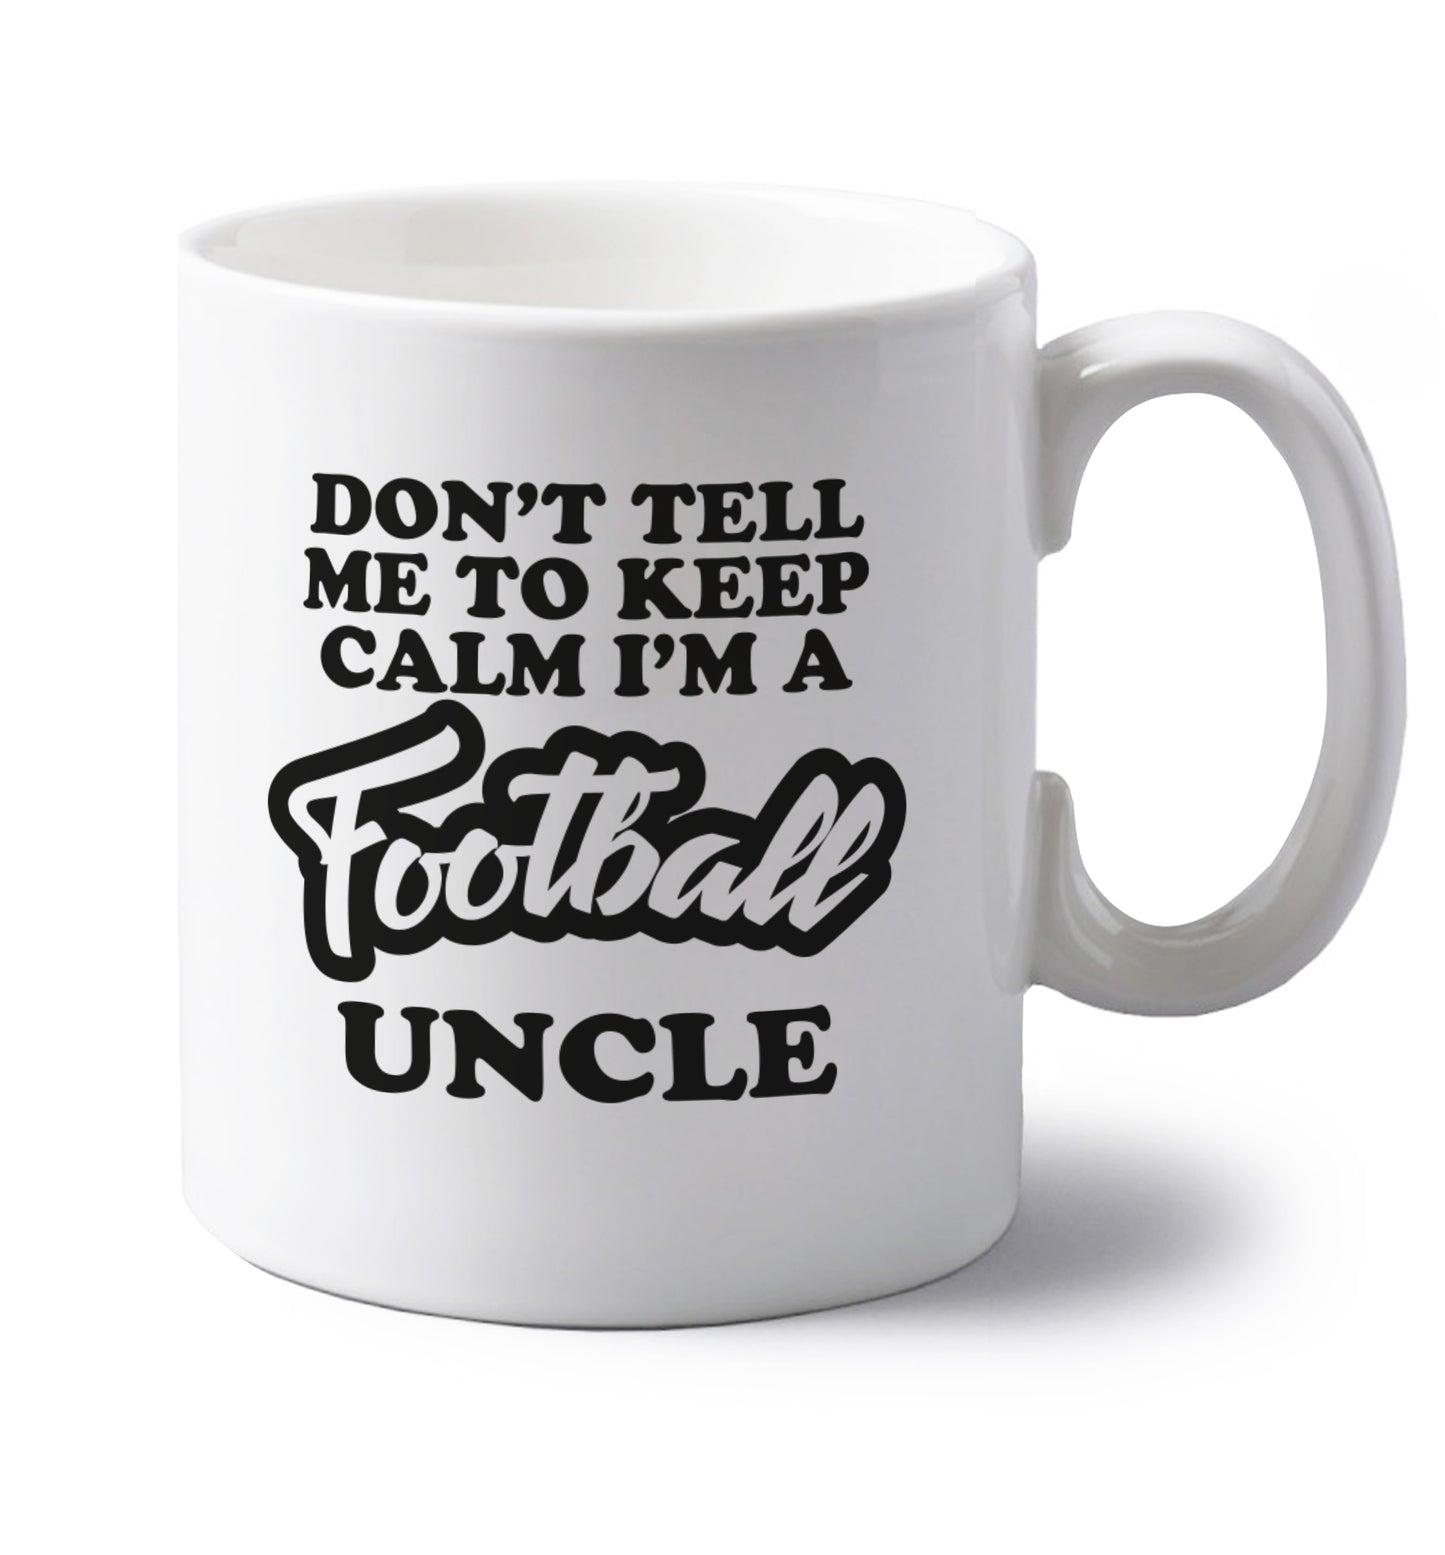 Don't tell me to keep calm I'm a football uncle left handed white ceramic mug 